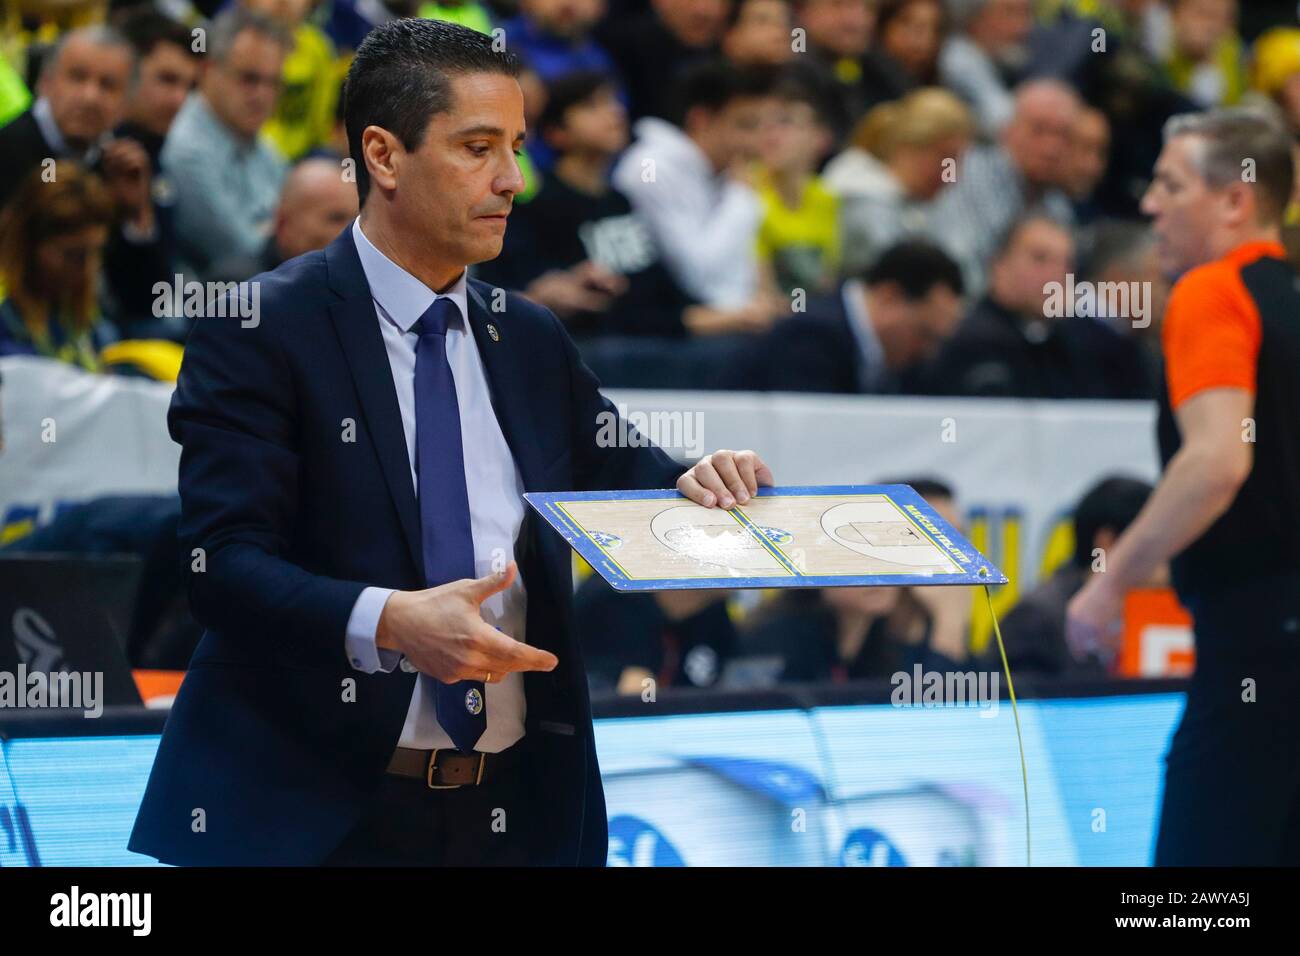 ISTANBUL / TURKEY - FEBRUARY 7, 2020: Coach Ioannis Sfairopoulos holding  tactic board during EuroLeague 2019-20 Round 24 basketball game between  Fenerbahce and Maccabi Tel Aviv at Ulker Sports Arena Stock Photo - Alamy